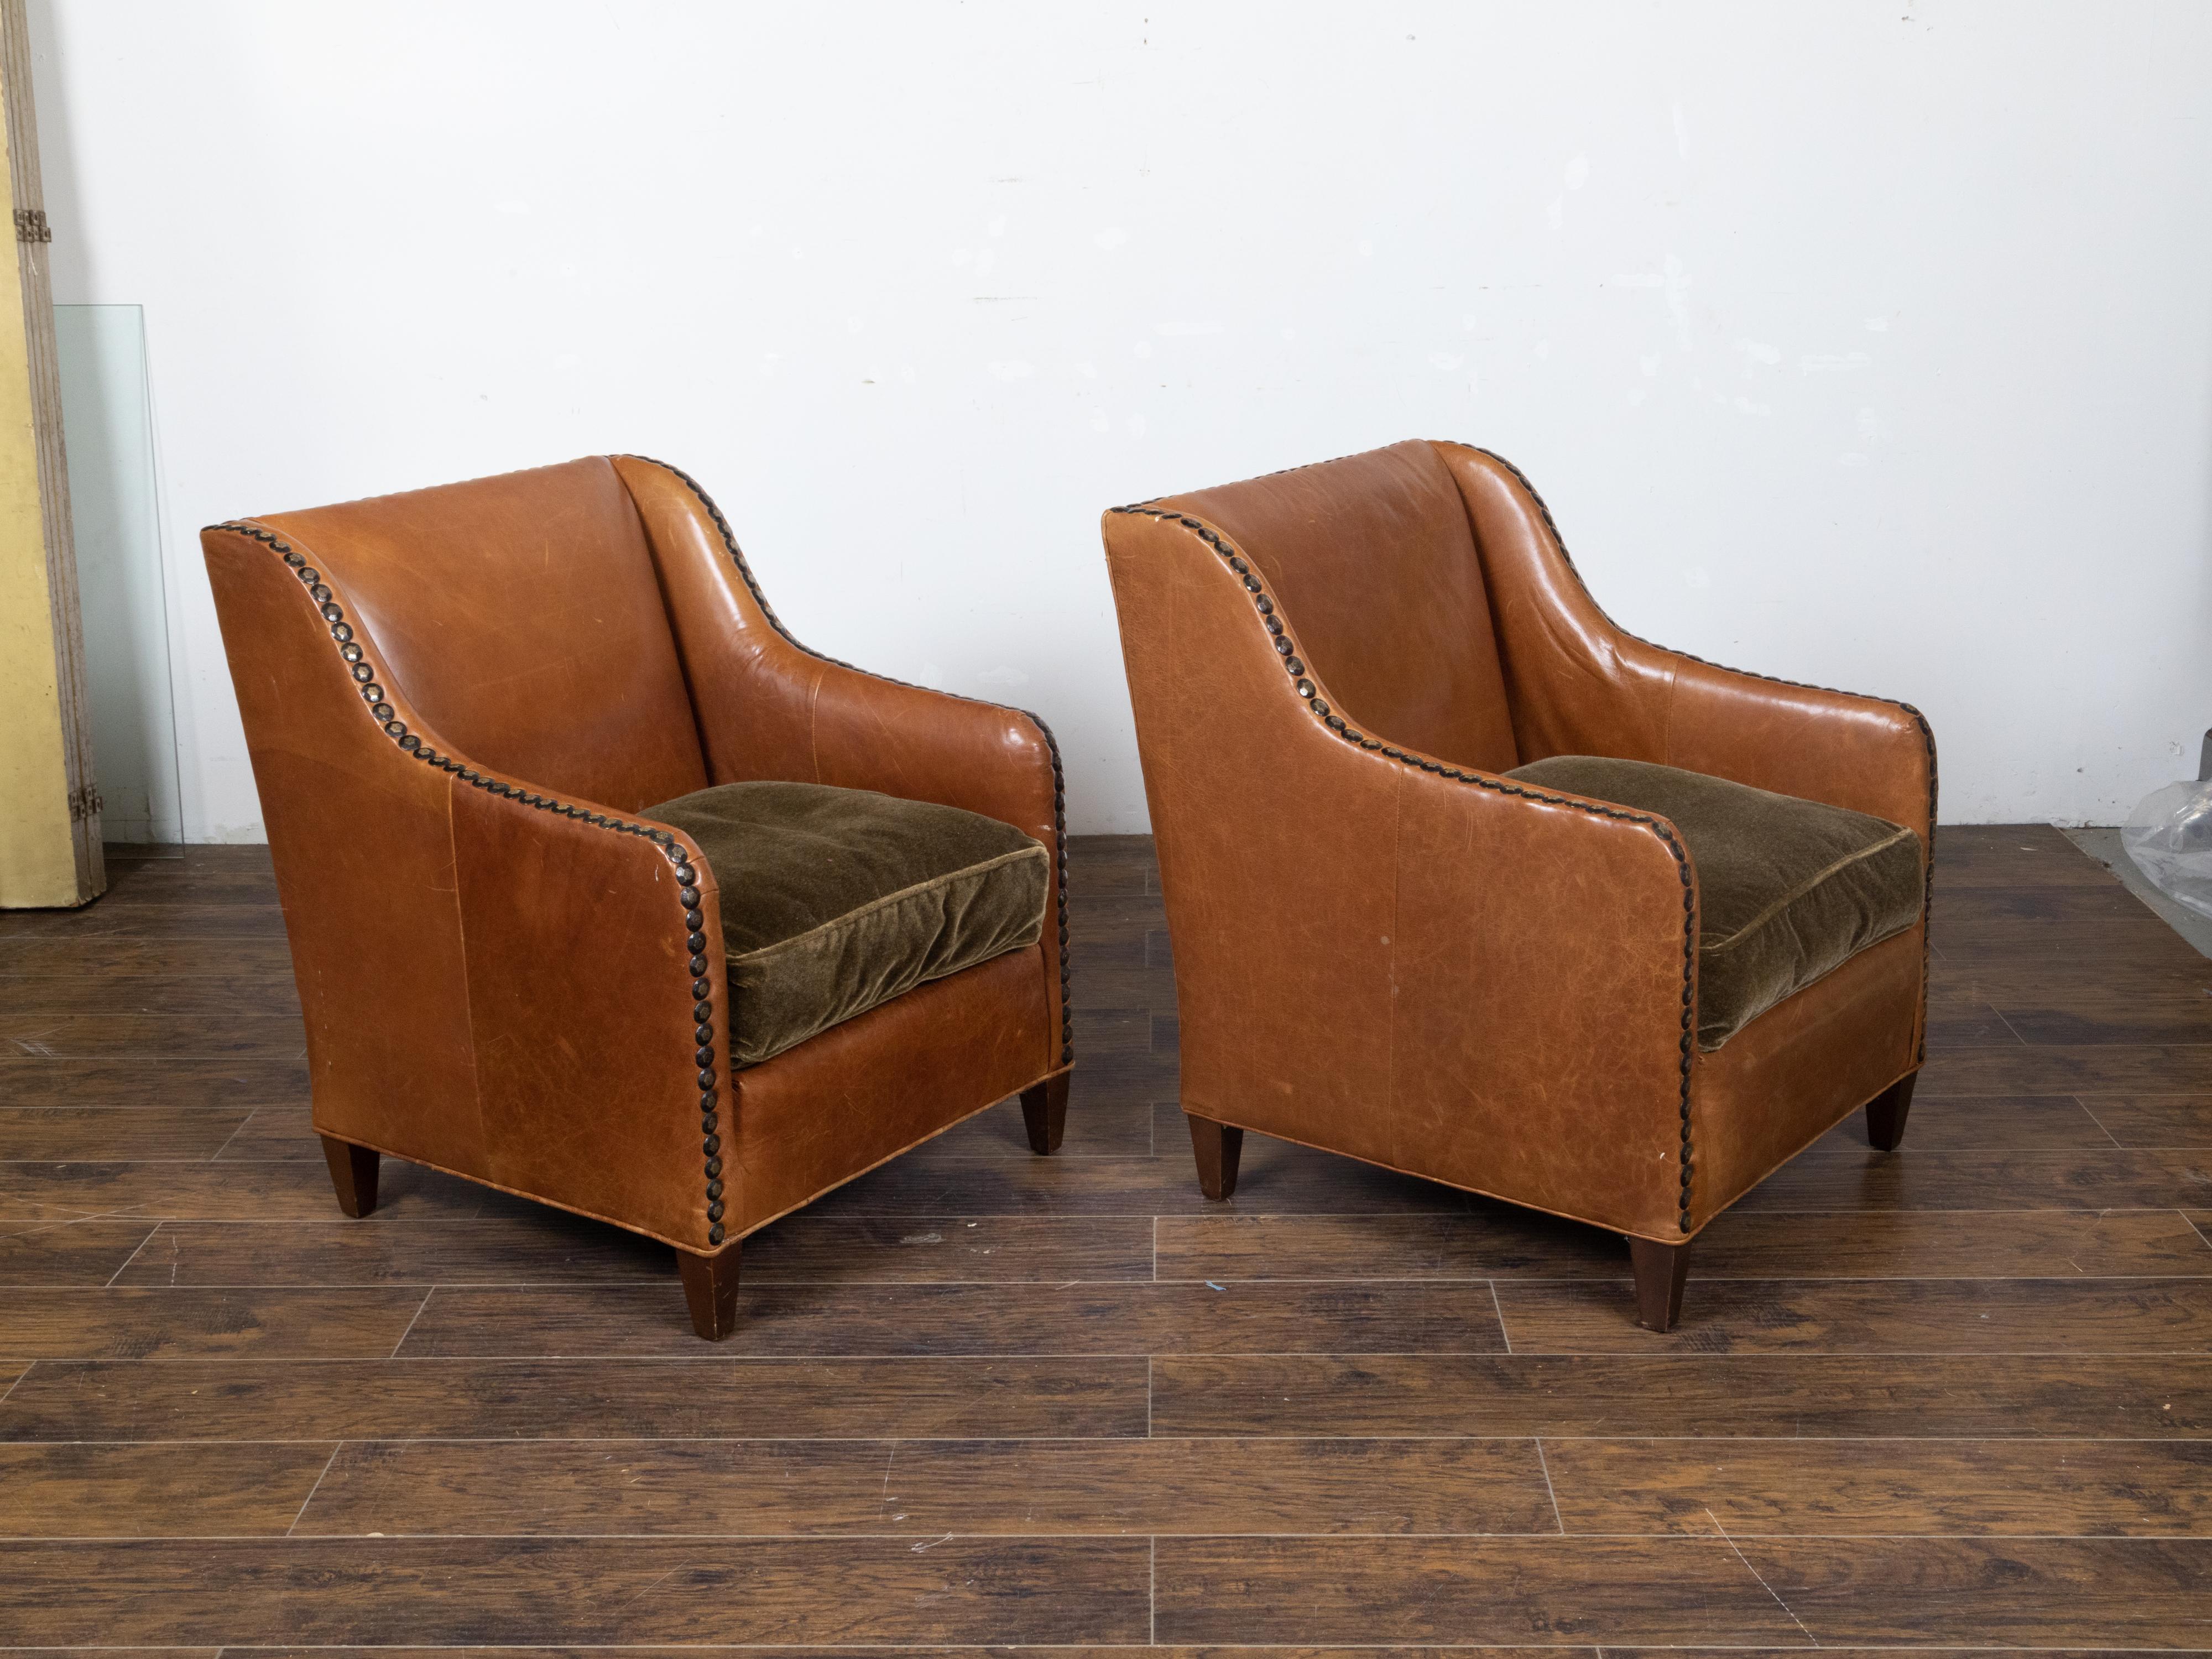 A pair of vintage English brown leather club chairs from the mid 20th century with slanted backs, velvet cushions, flattened nailhead trim and short tapered wooden feet. This pair of vintage English brown leather club chairs, hailing from the